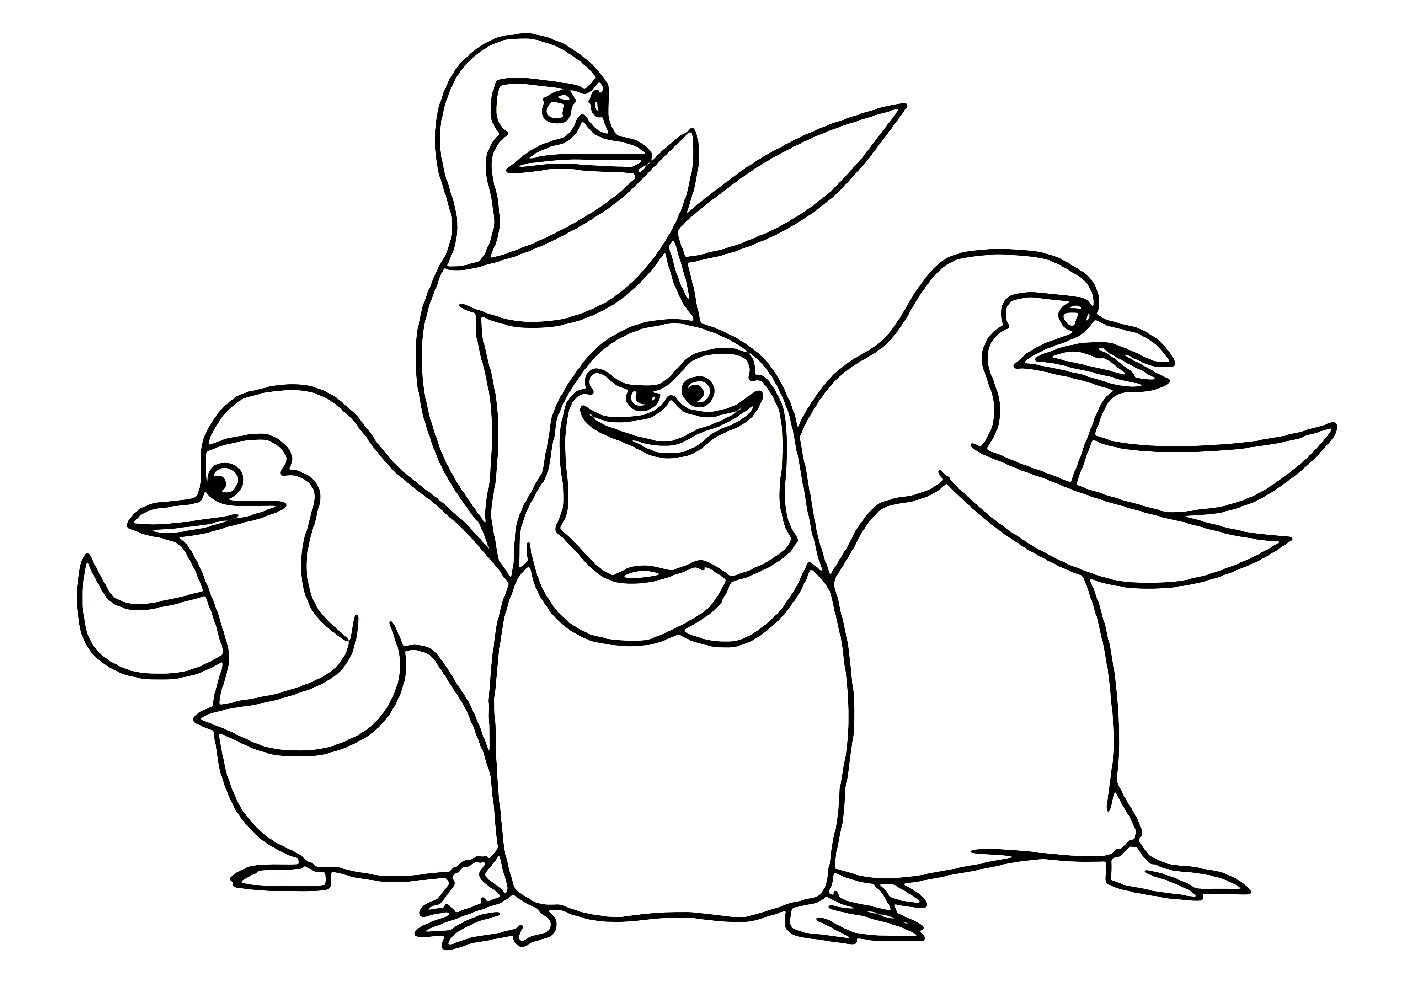 Free Printable Penguins of Madagascar Coloring Page